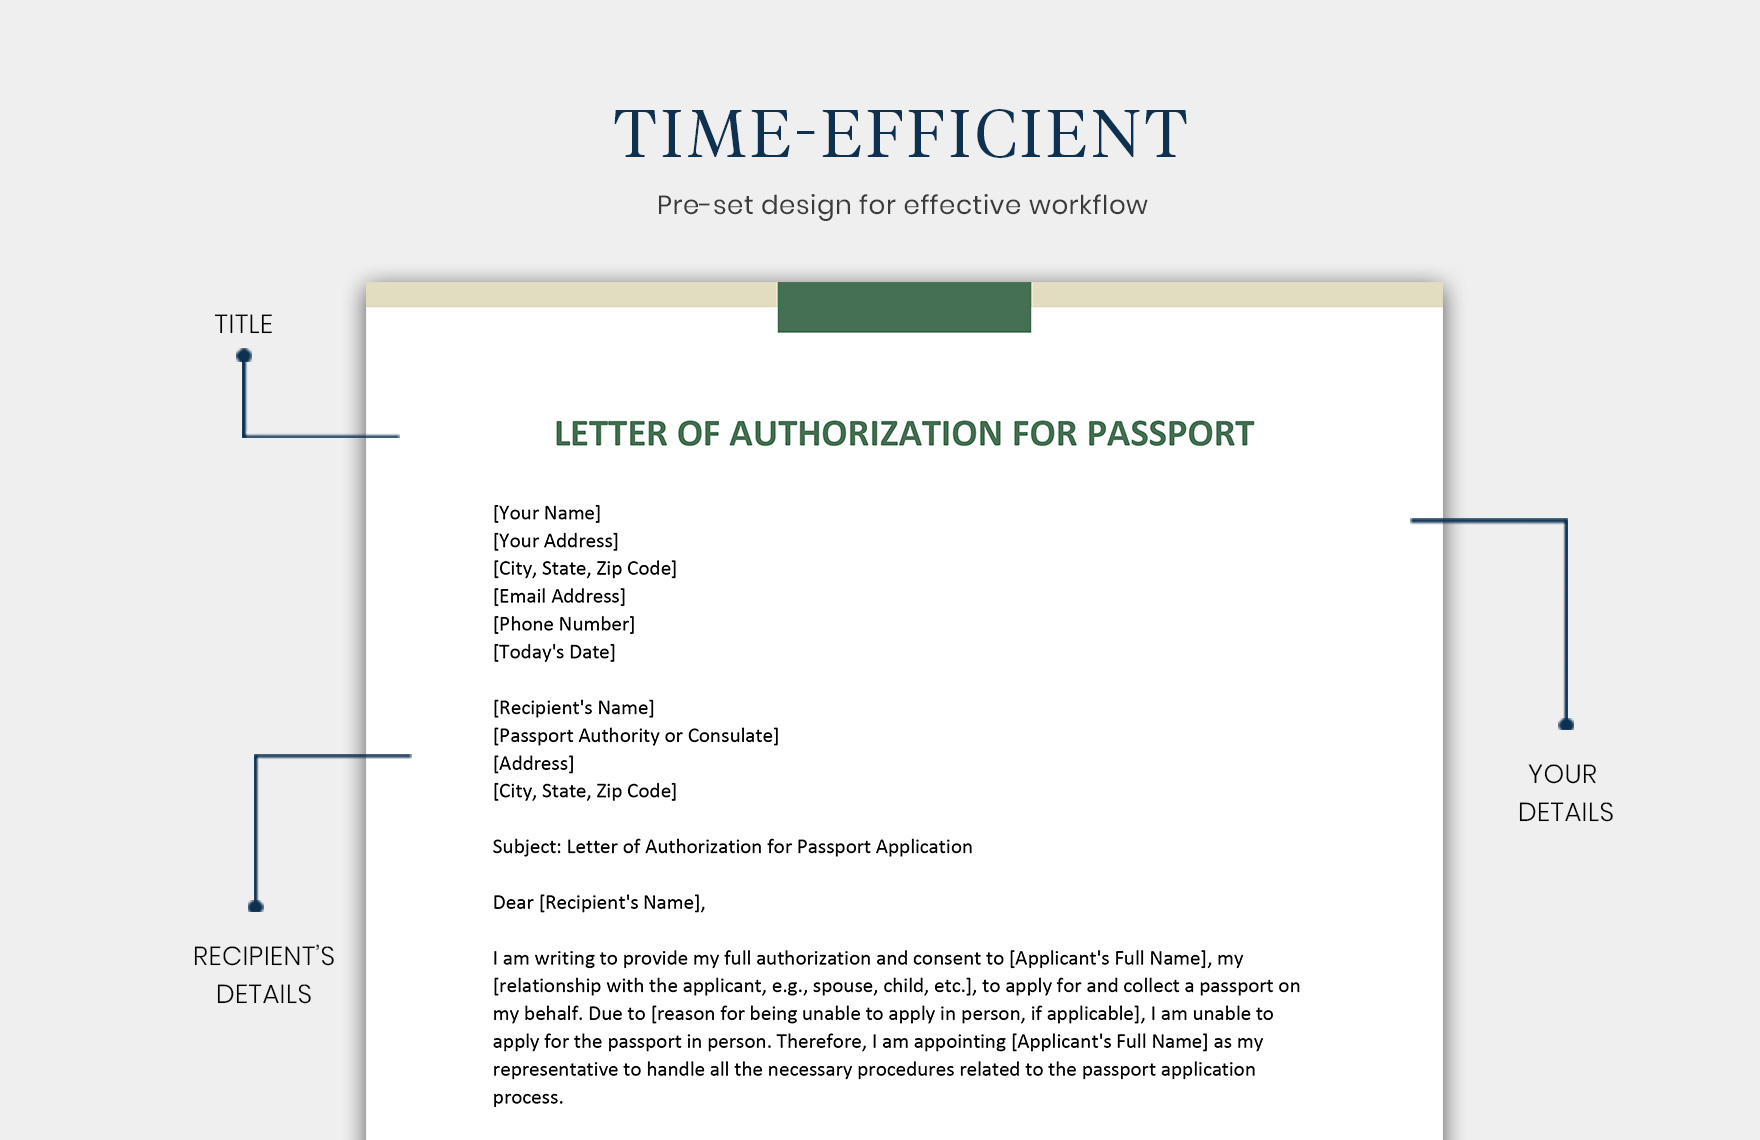 Letter of Authorization for Passport